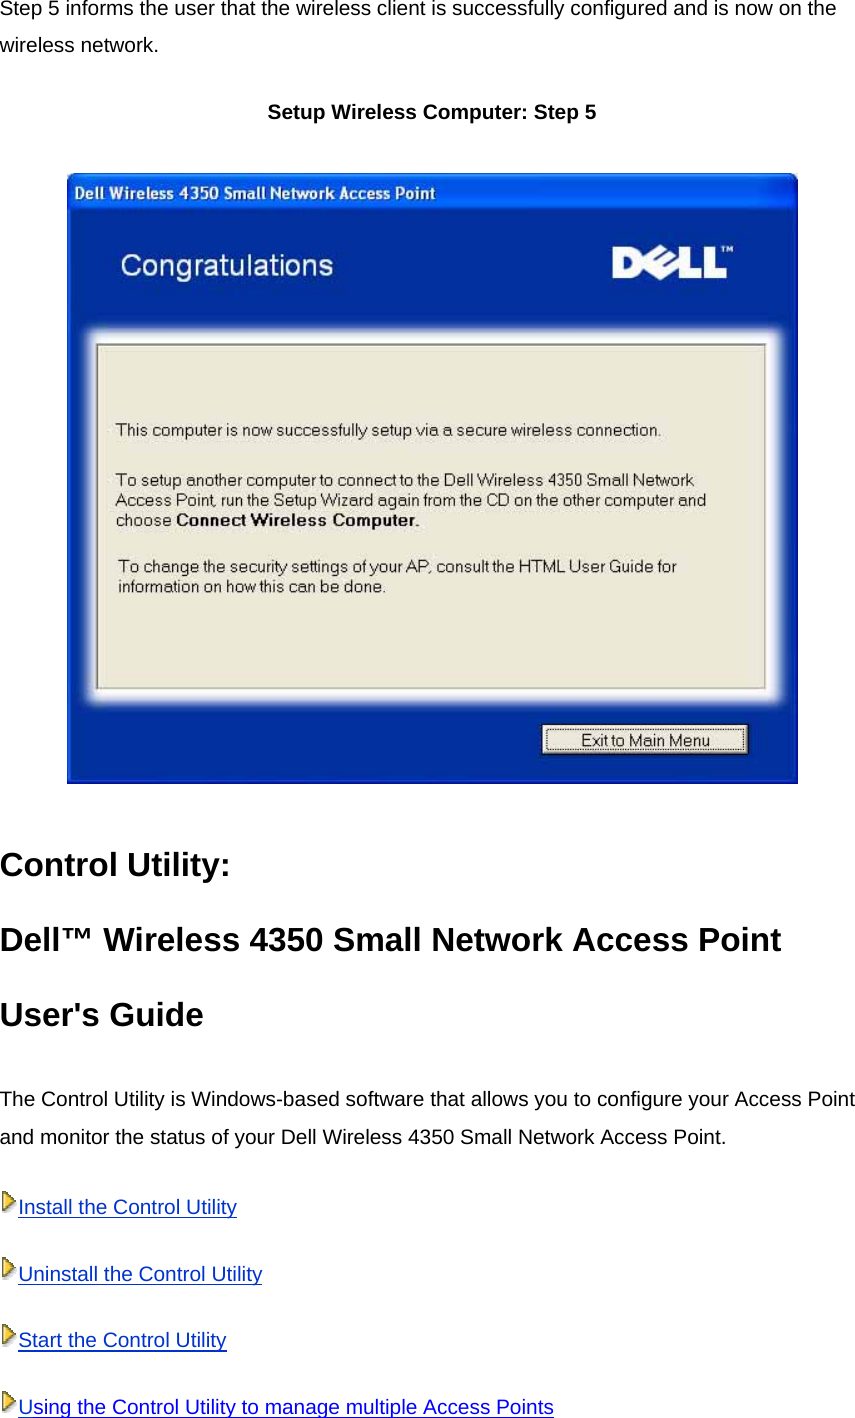 Step 5 informs the user that the wireless client is successfully configured and is now on the wireless network.  Setup Wireless Computer: Step 5  Control Utility:   Dell™ Wireless 4350 Small Network Access Point User&apos;s Guide The Control Utility is Windows-based software that allows you to configure your Access Point and monitor the status of your Dell Wireless 4350 Small Network Access Point. Install the Control UtilityUninstall the Control UtilityStart the Control UtilityUsing the Control Utility to manage multiple Access Points